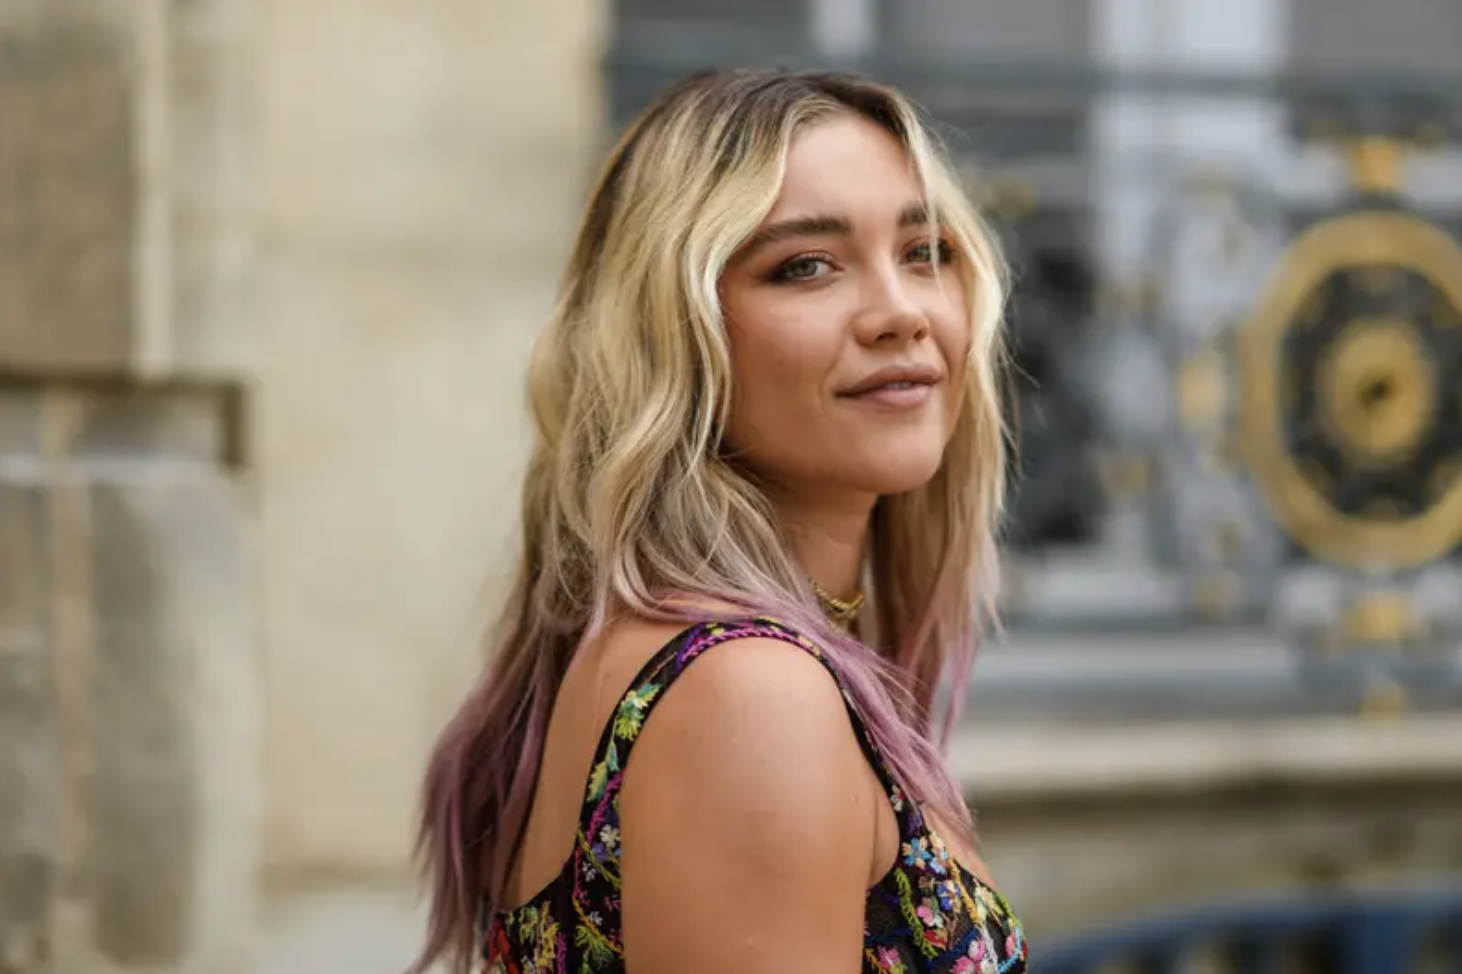 Florence Pugh has pink ombre hair and looks at the camera